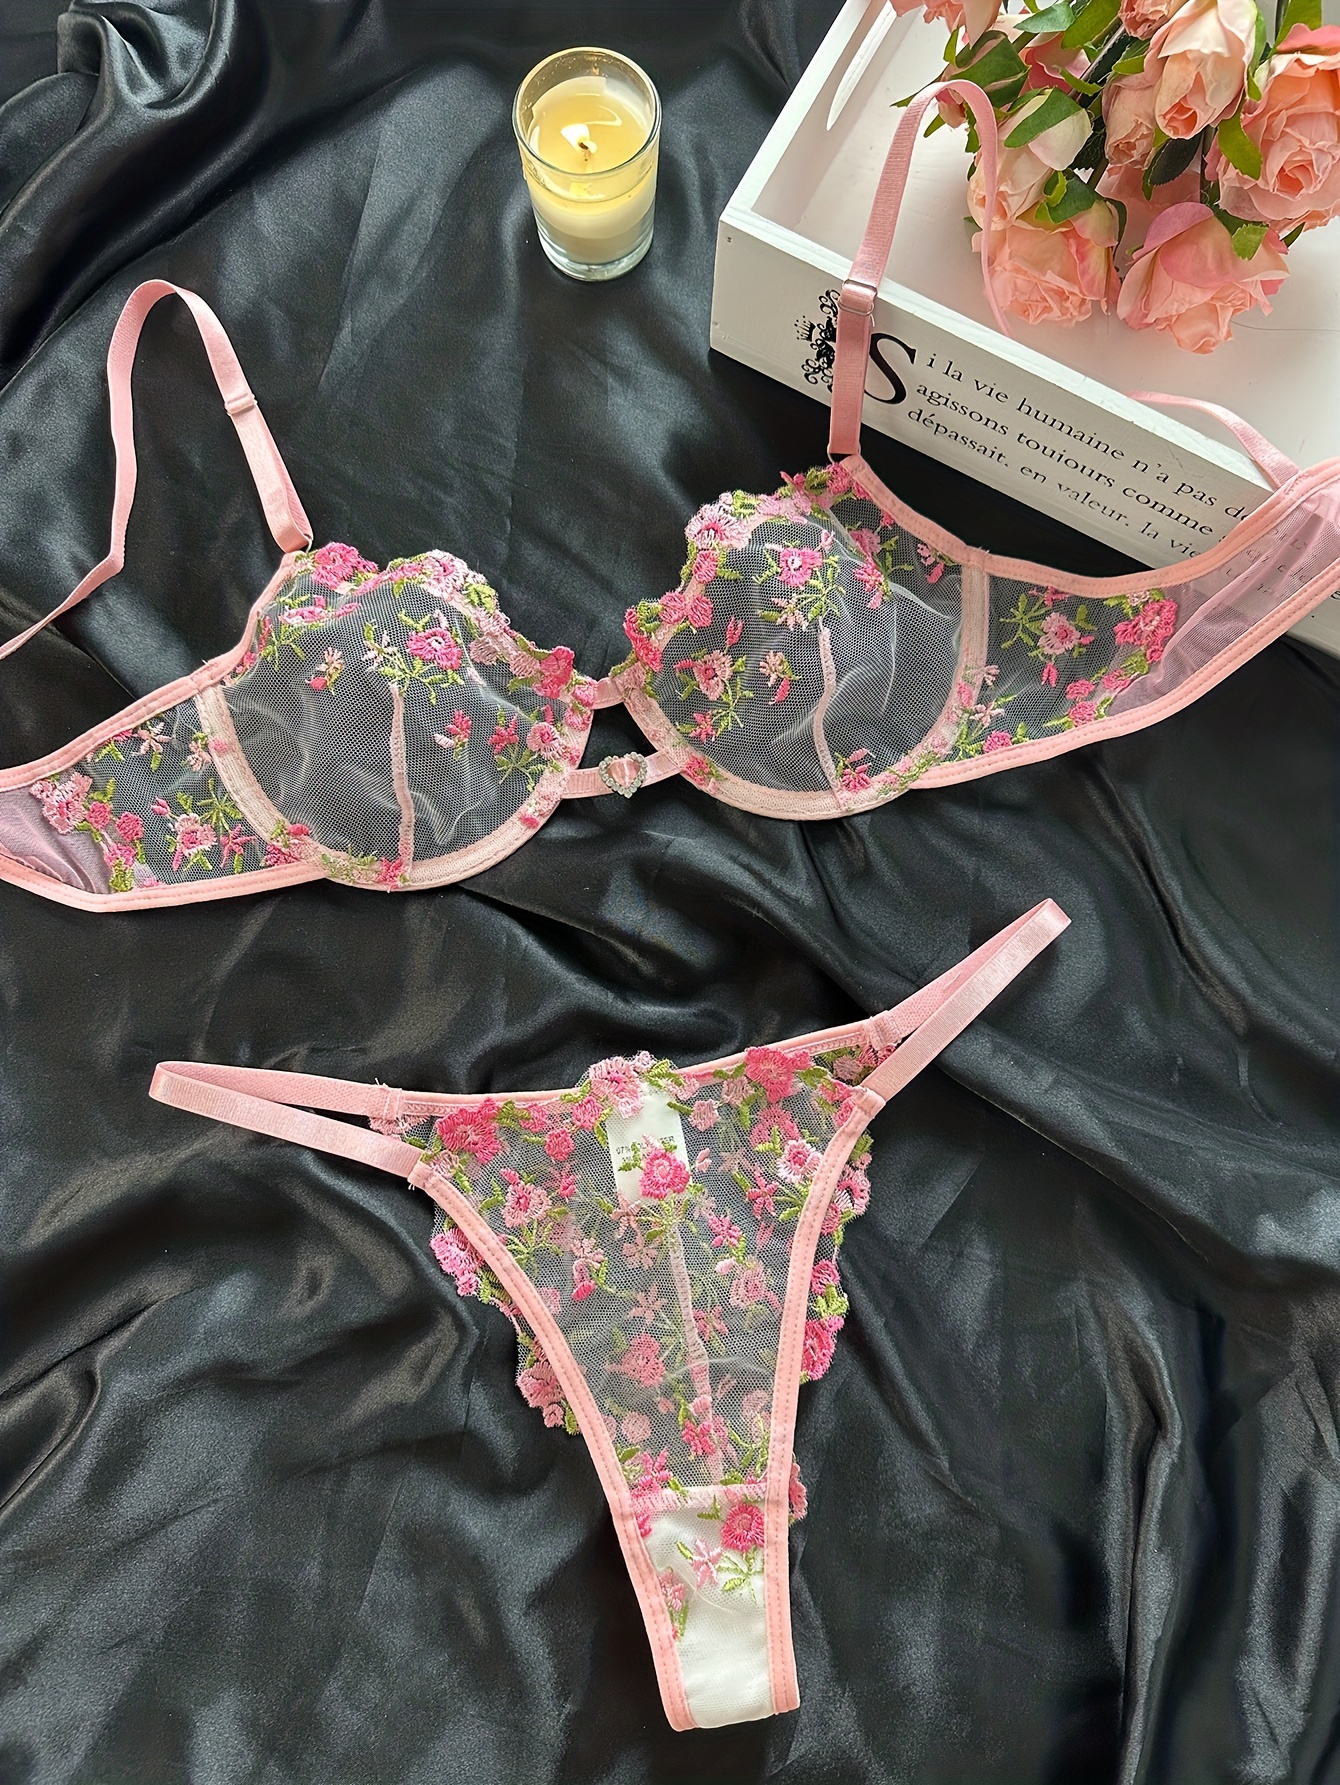 Is That The New Embroidered Floral Sheer Mesh Lingerie Set